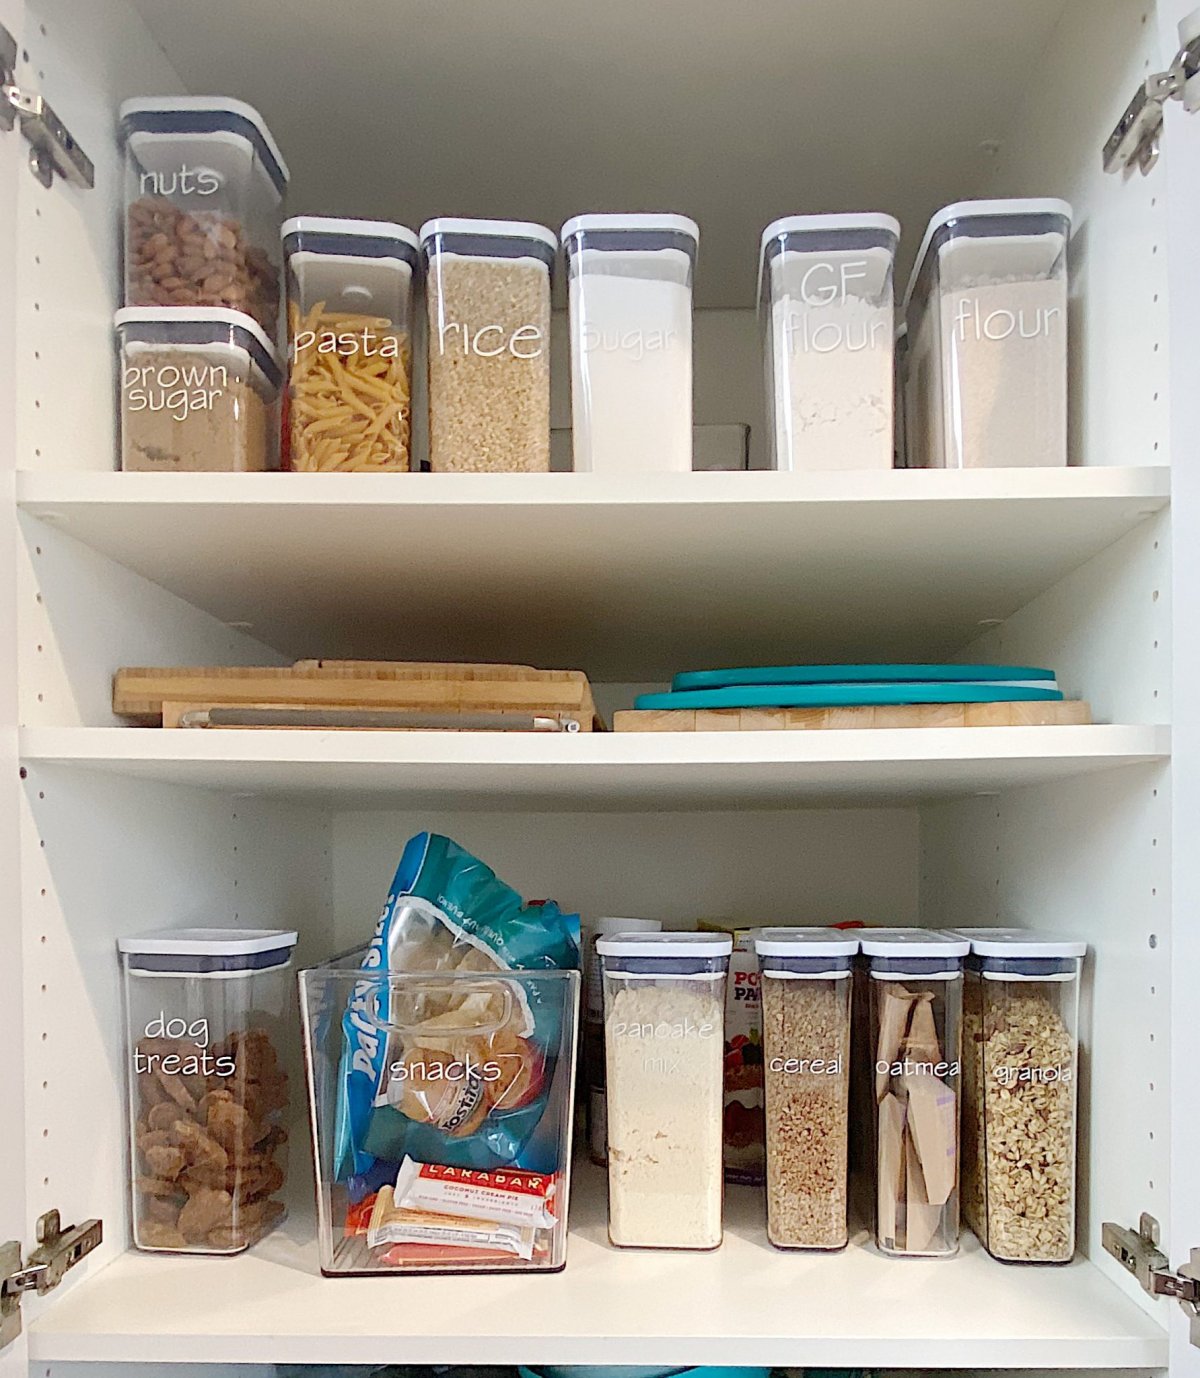 https://my100yearoldhome.com/wp-content/uploads/2020/08/Organized-Pantry-Shelves-scaled.jpg